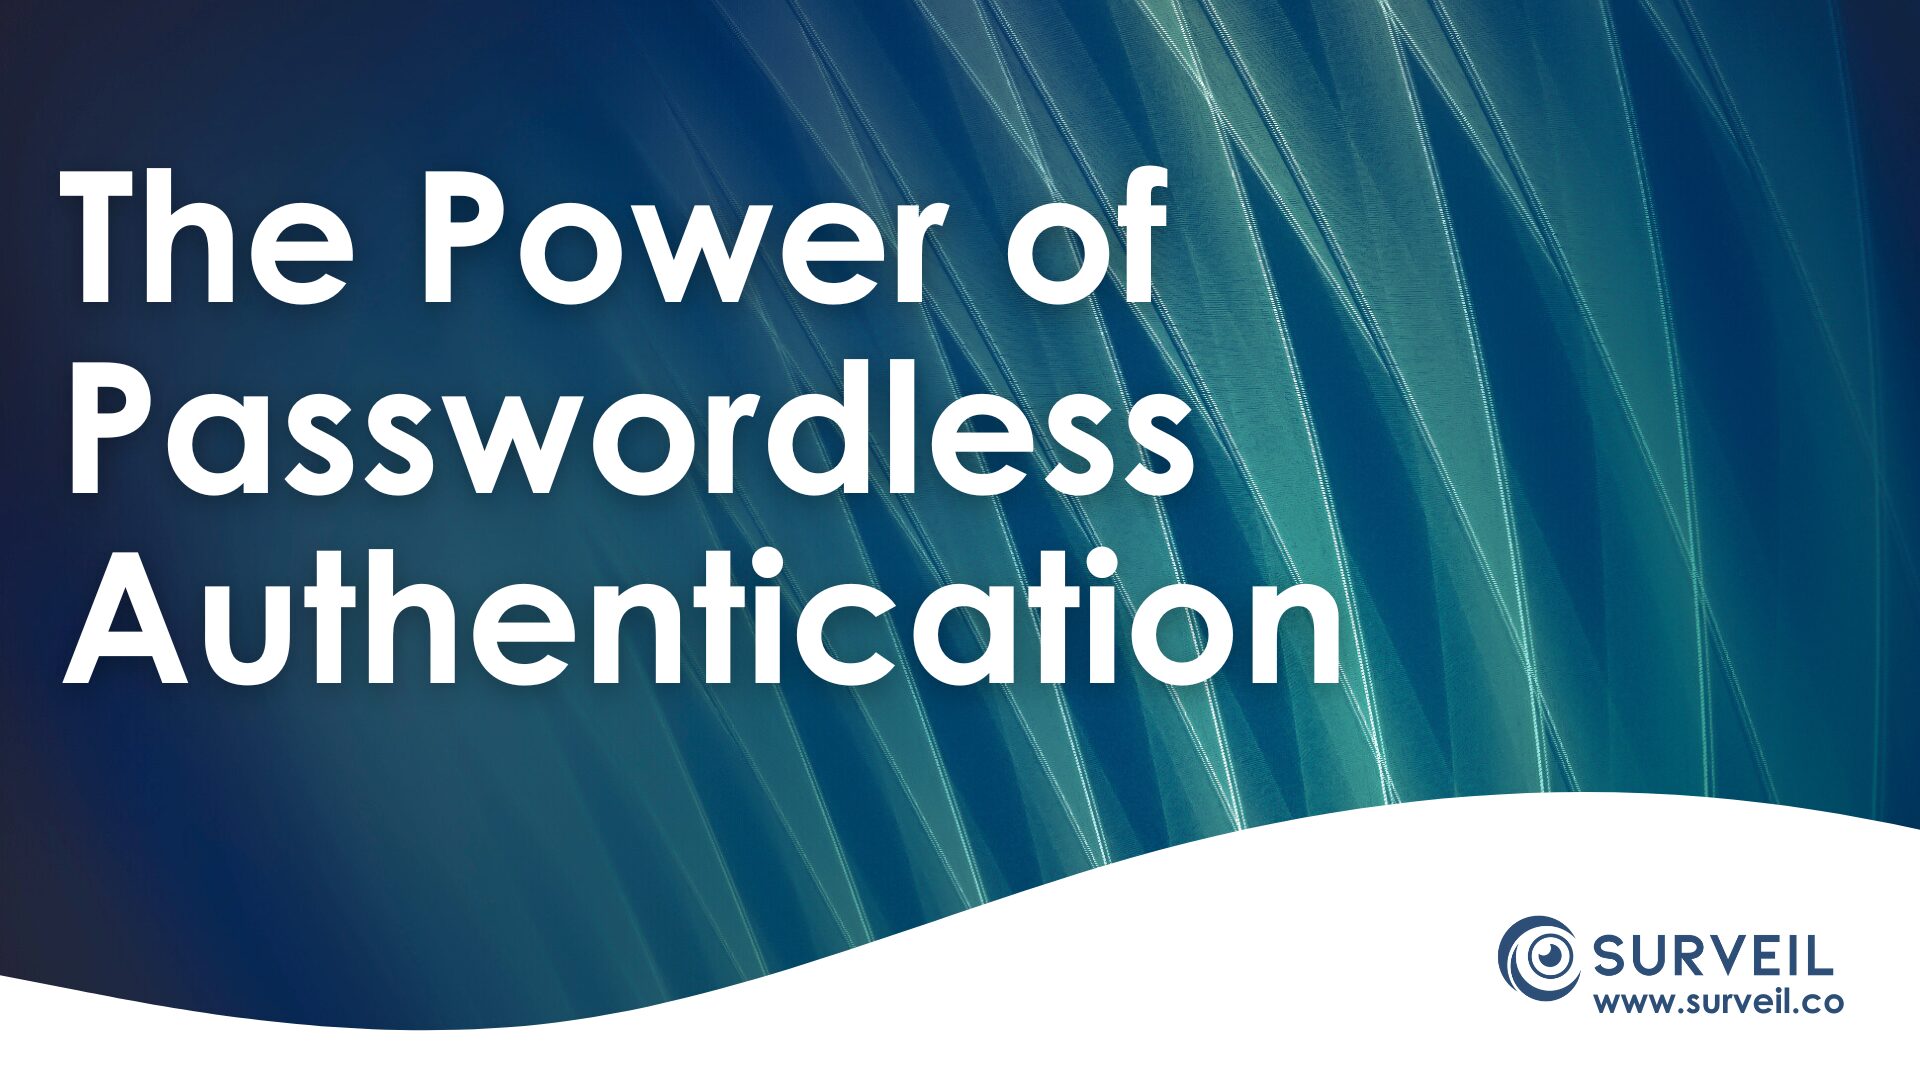 The Power of Passwordless Authentication